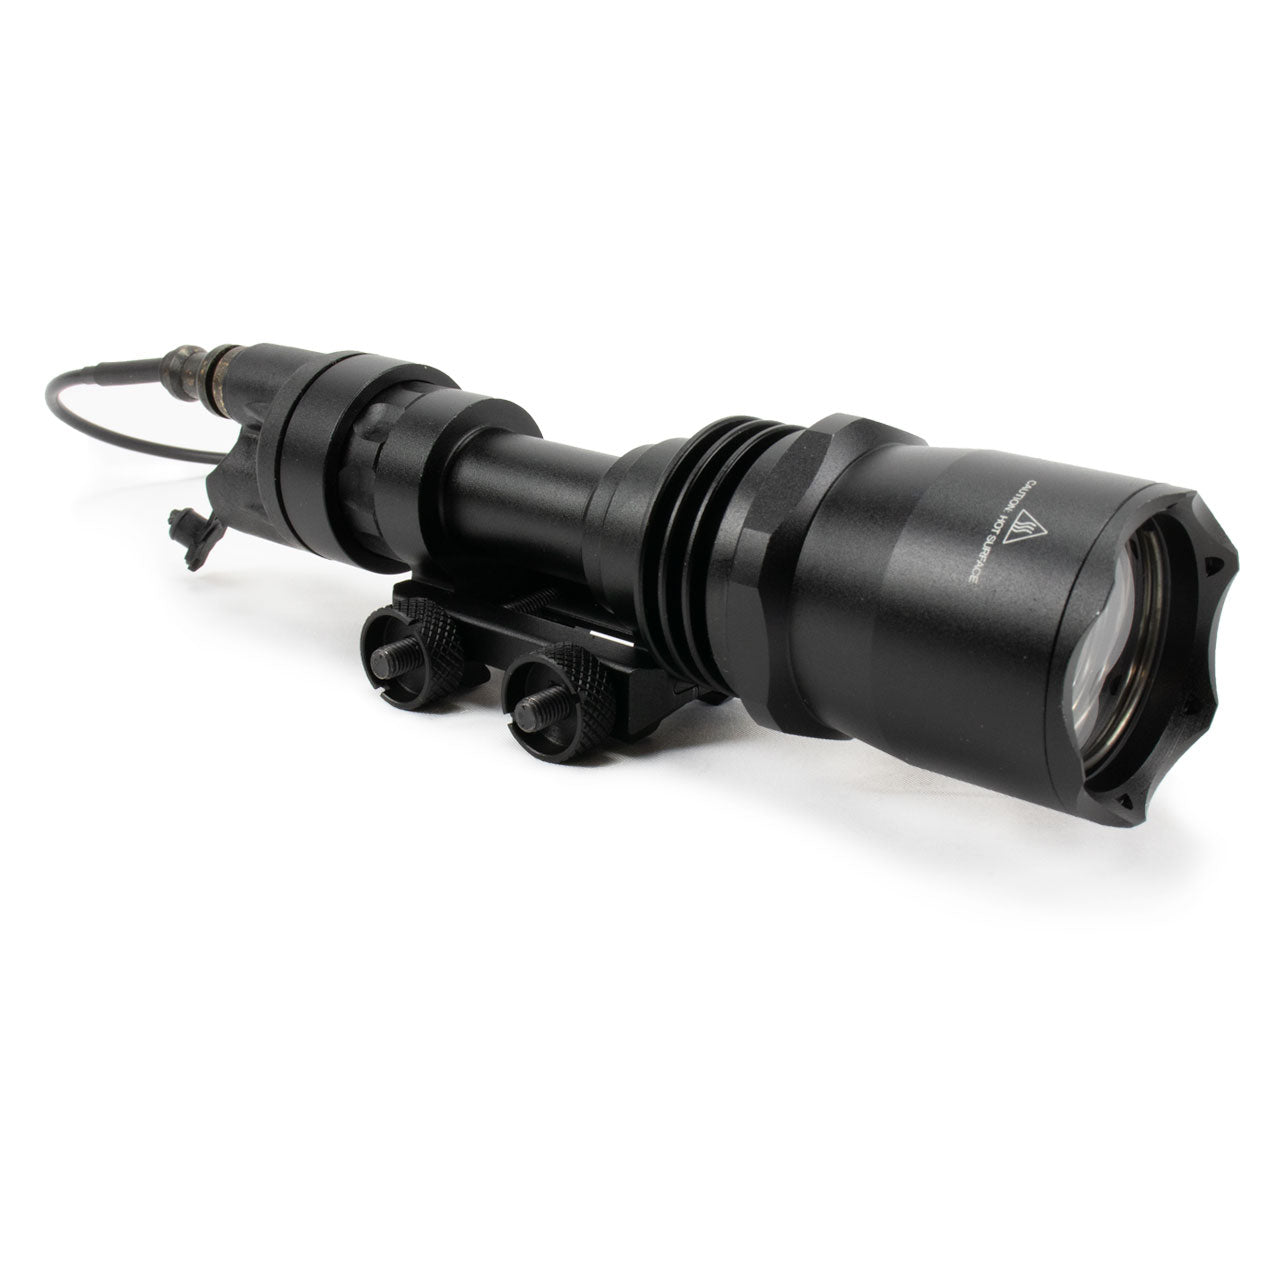 Avengers Airsoft Tactical CREE LED "SuperTac" Weapon Light w/ Pressure Pad